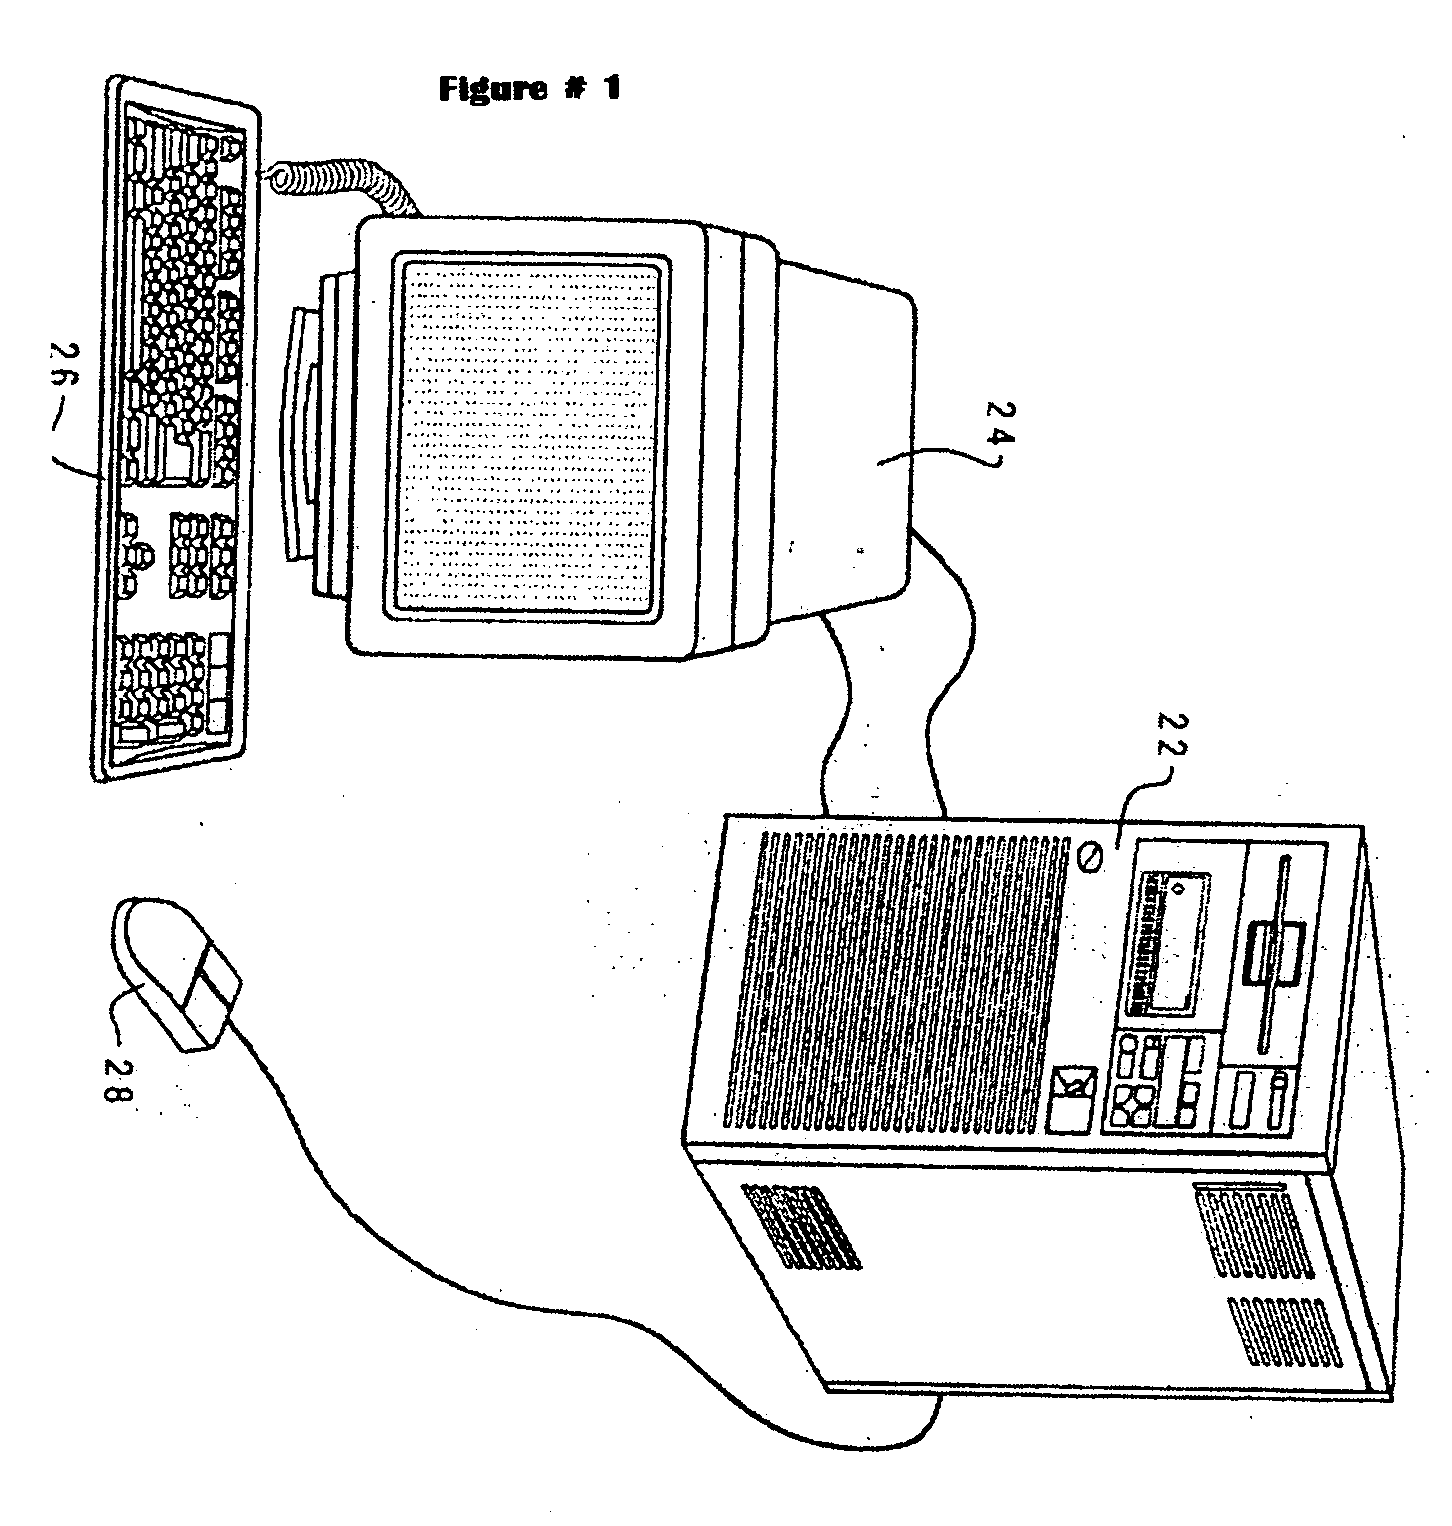 System and method for the cross-platform transmission of messages